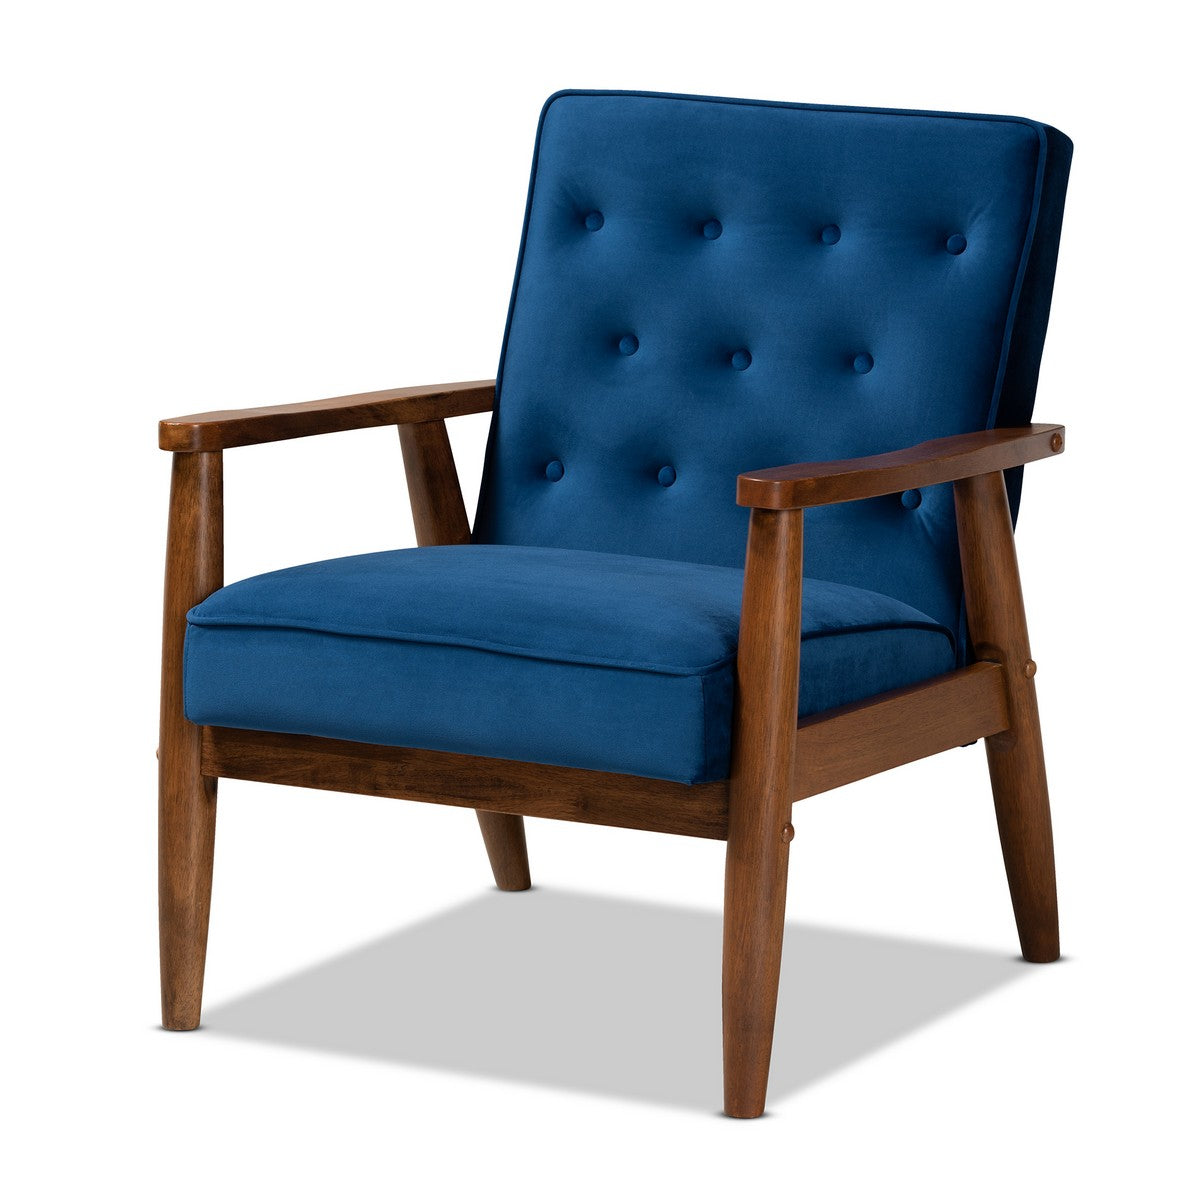 Baxton Studio Sorrento Mid-century Modern Navy Blue Velvet Fabric Upholstered Walnut Finished Wooden Lounge Chair Baxton Studio- Chairs-Minimal And Modern - 1